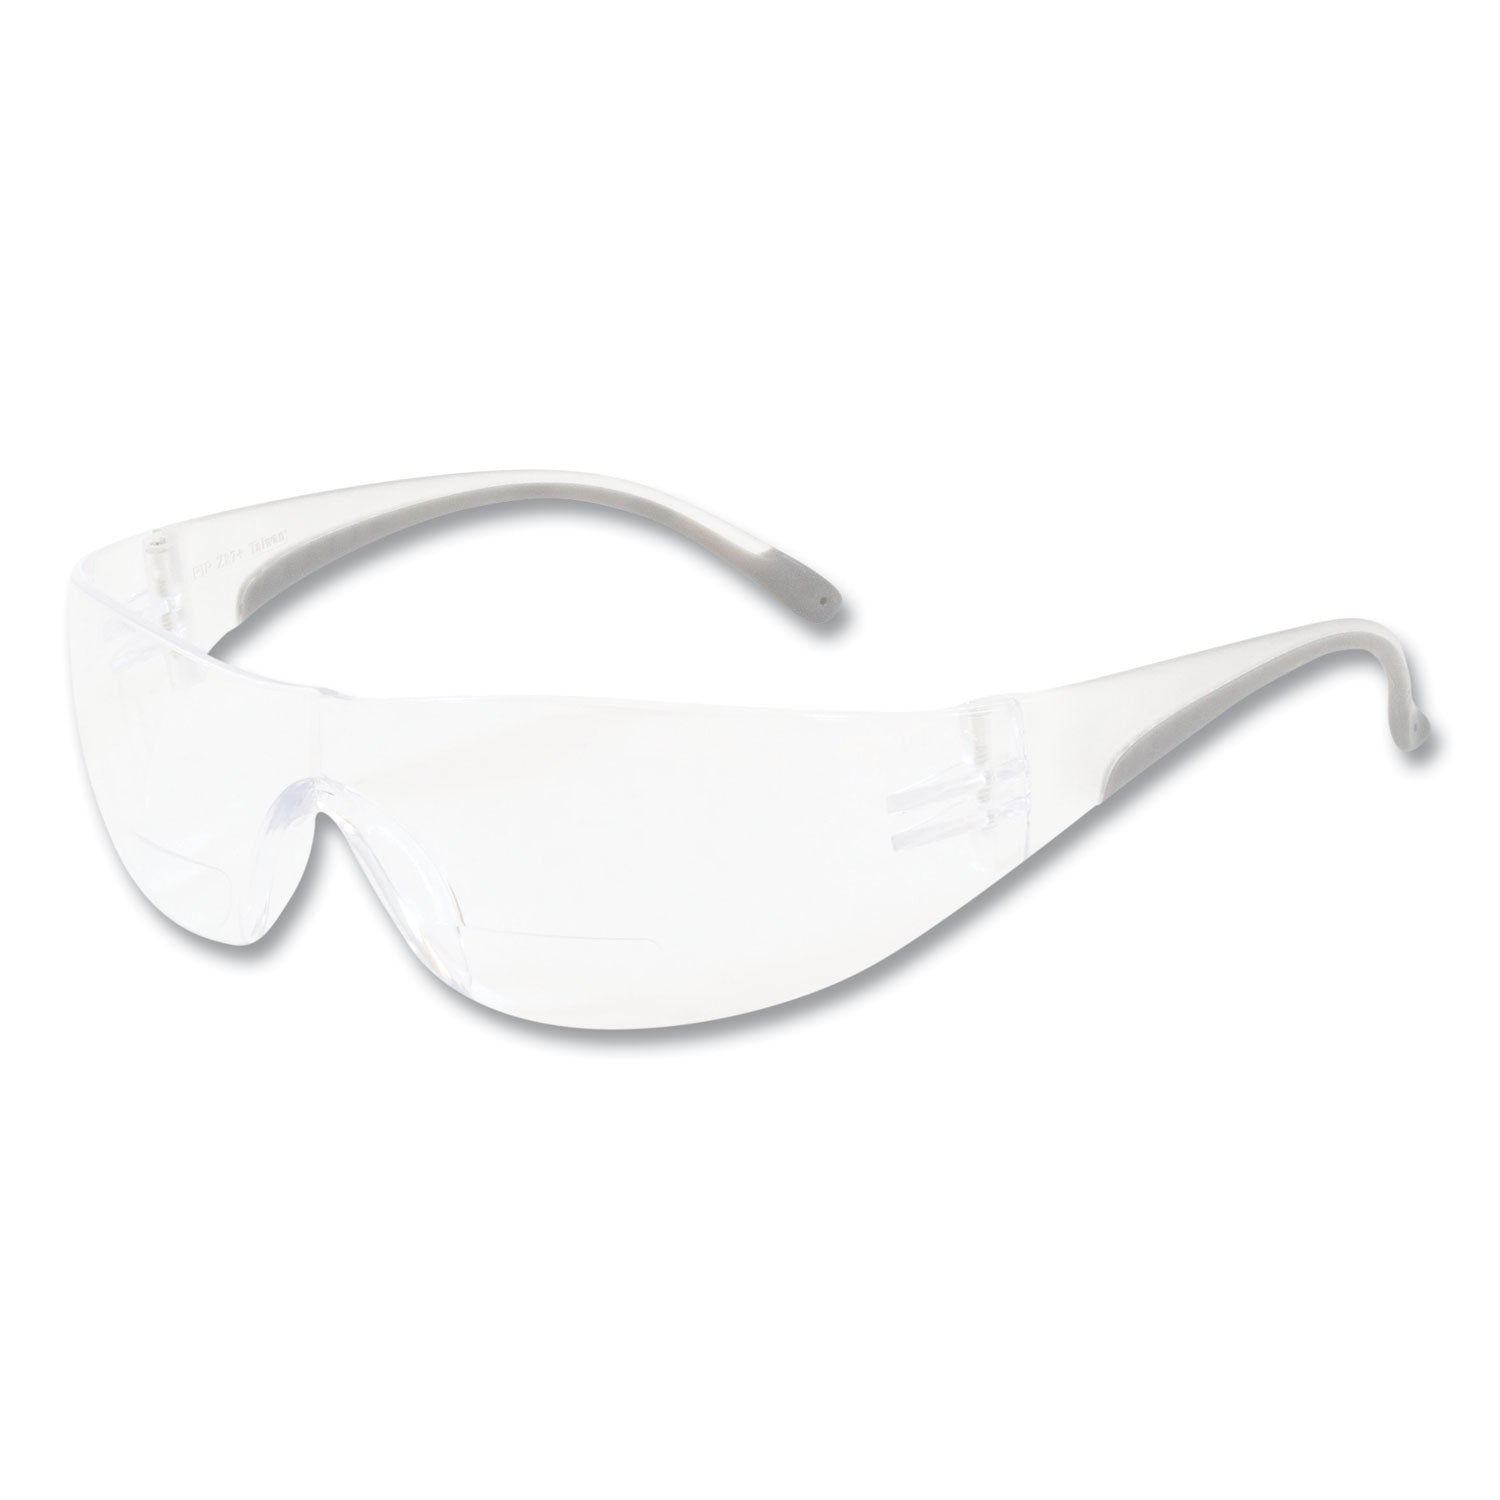 zenon-z12r-rimless-optical-eyewear-with-3-diopter-bifocal-reading-glass-design-scratch-resistant-clear-lens-clear-frame_pid250270030 - 1